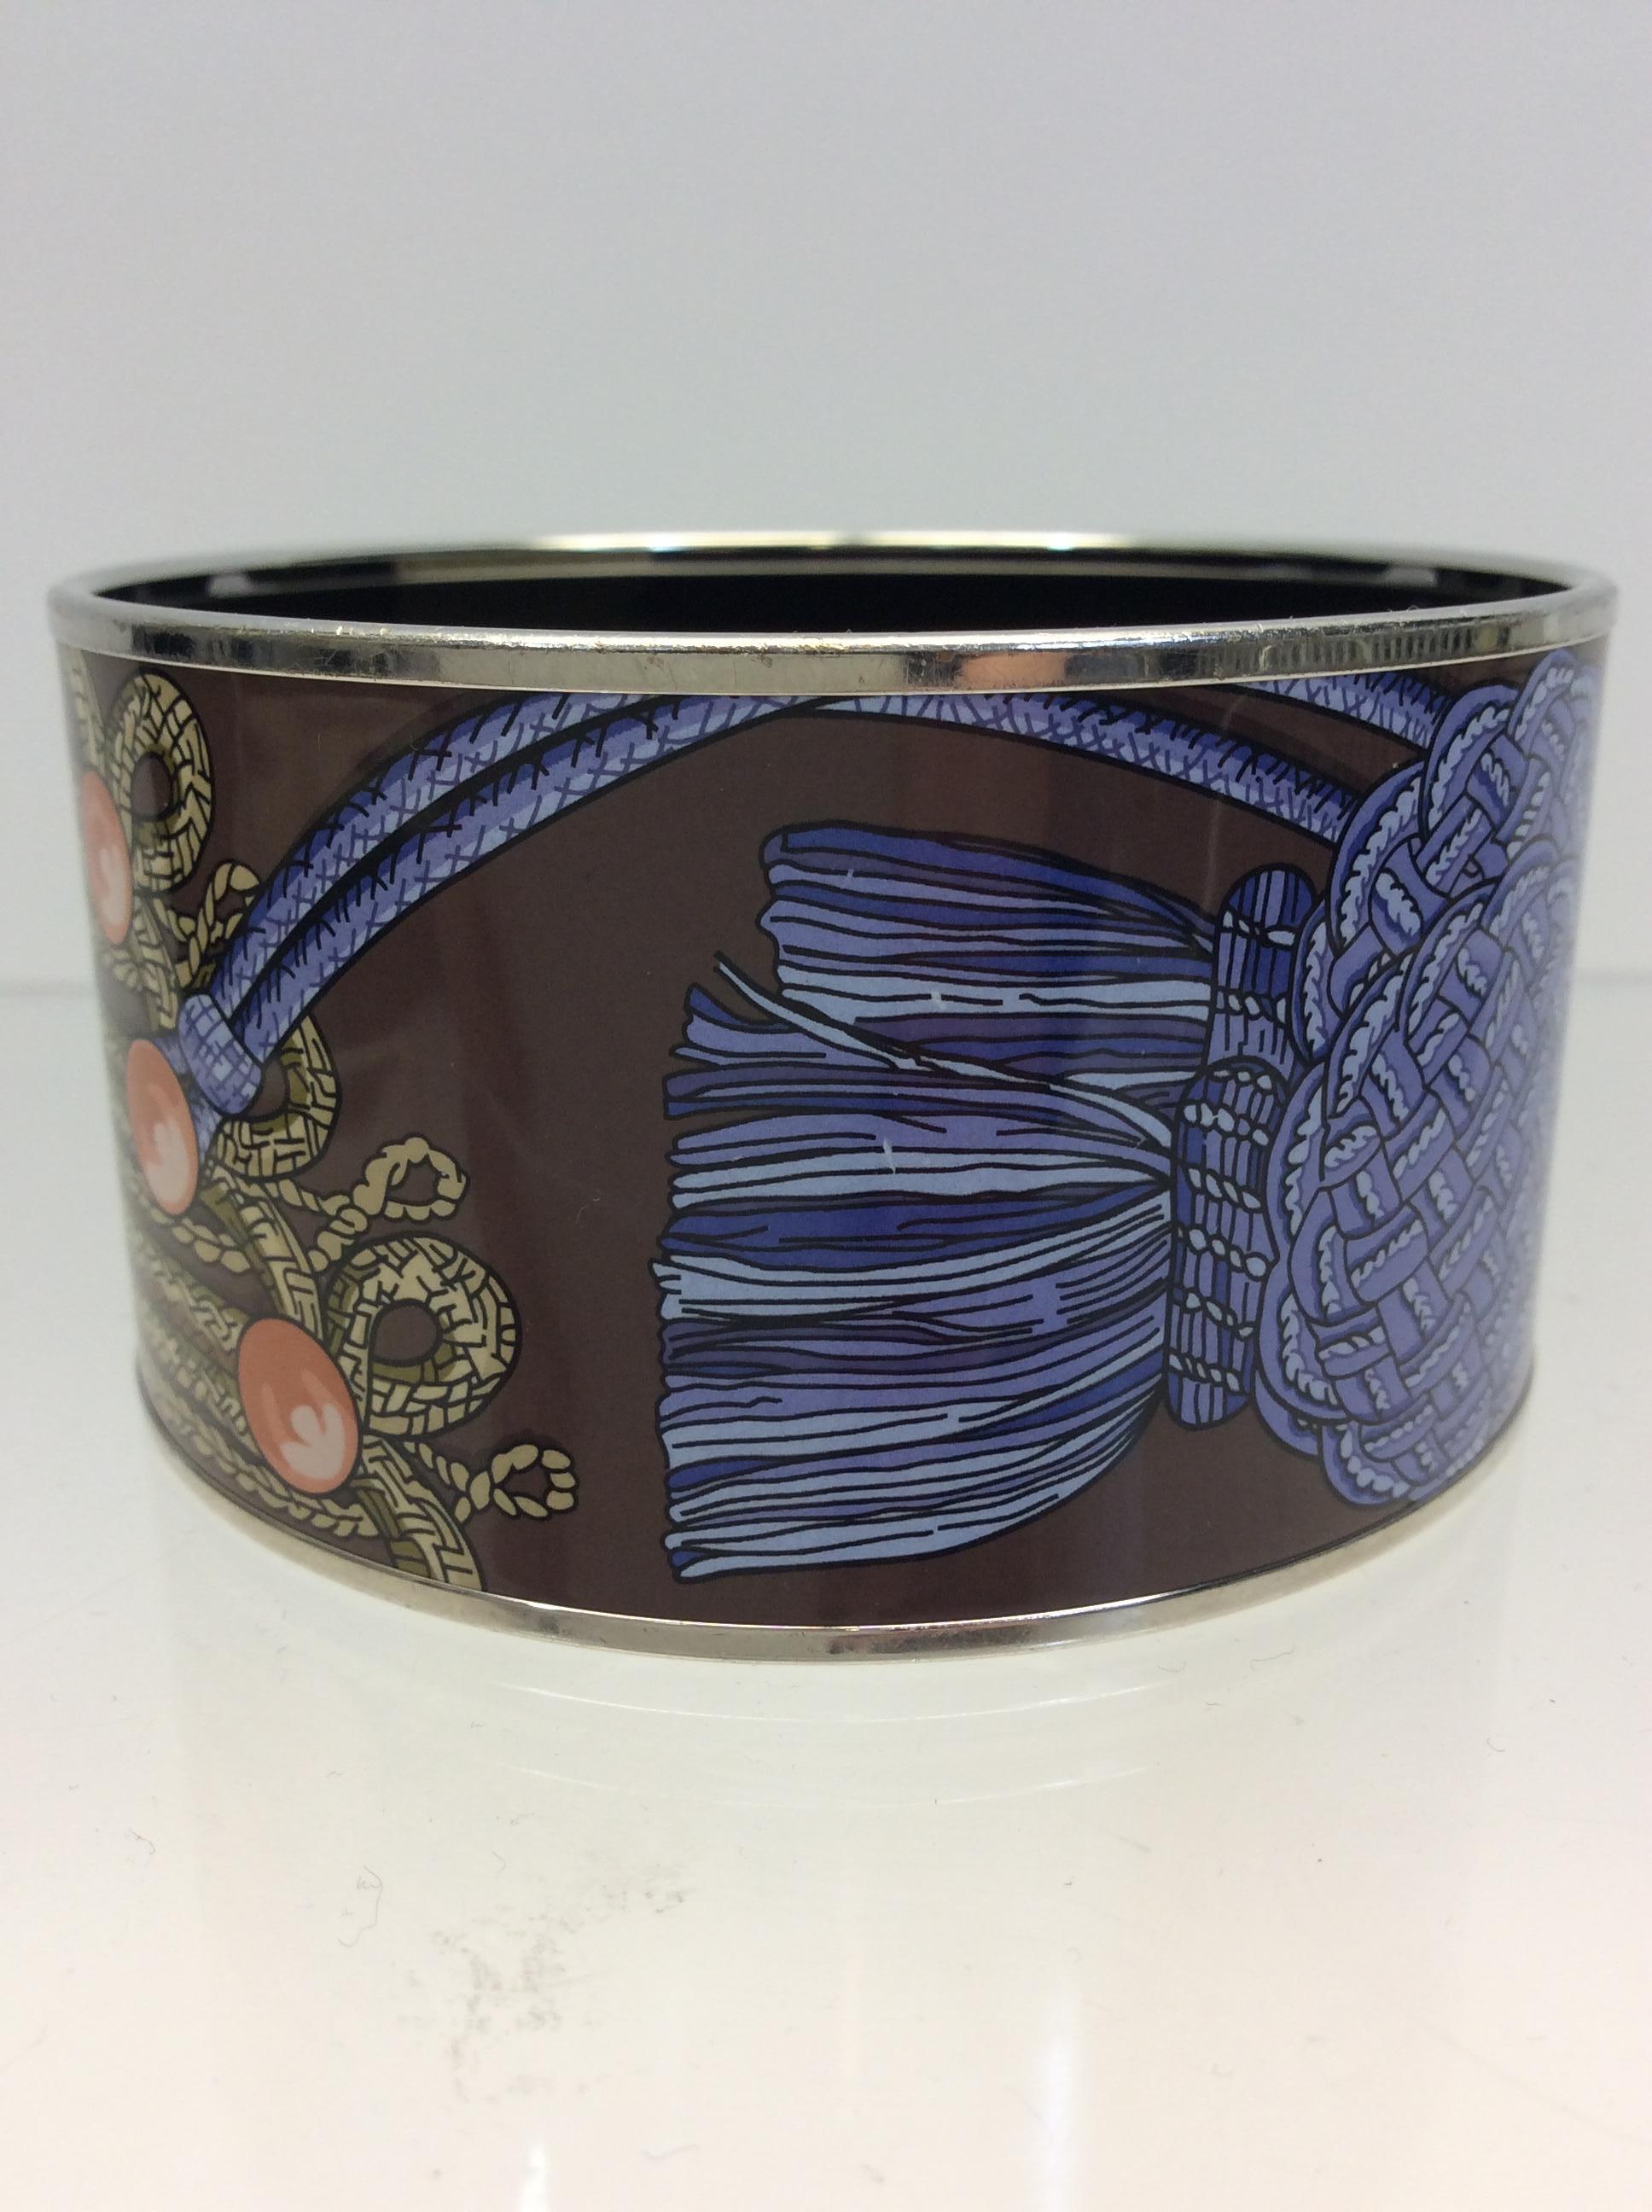 Hermes Brown and Blue Enamel Bracelet In Good Condition For Sale In Narberth, PA